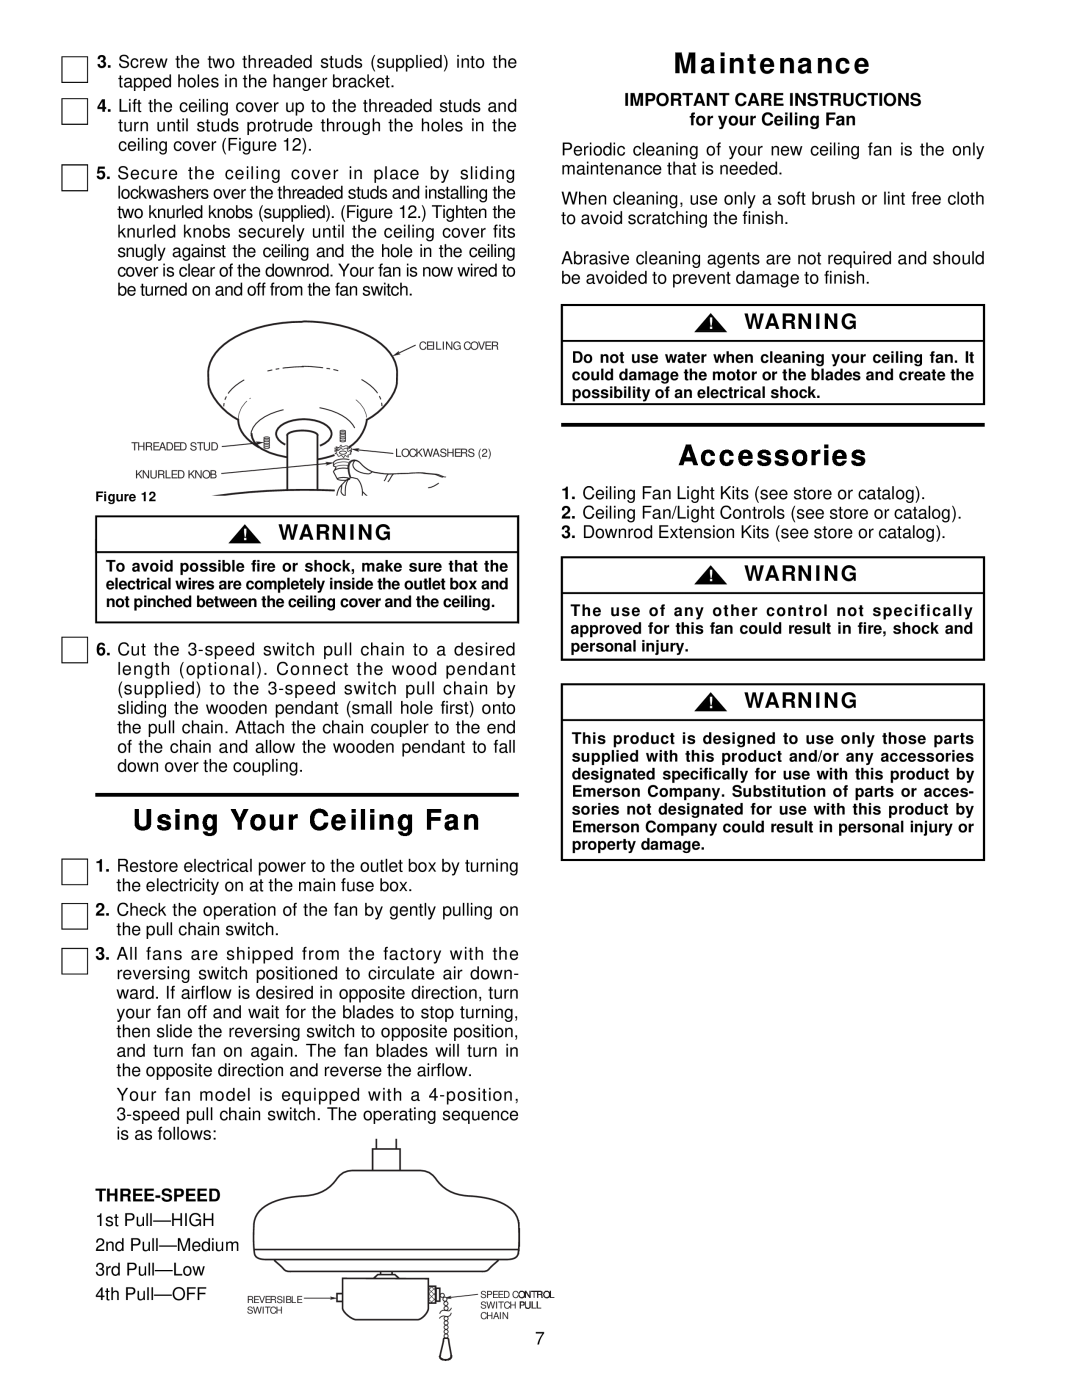 Emerson CF715AW00 Using Your Ceiling Fan, Maintenance, Accessories, IMPORTANT CARE INSTRUCTIONS for your Ceiling Fan 